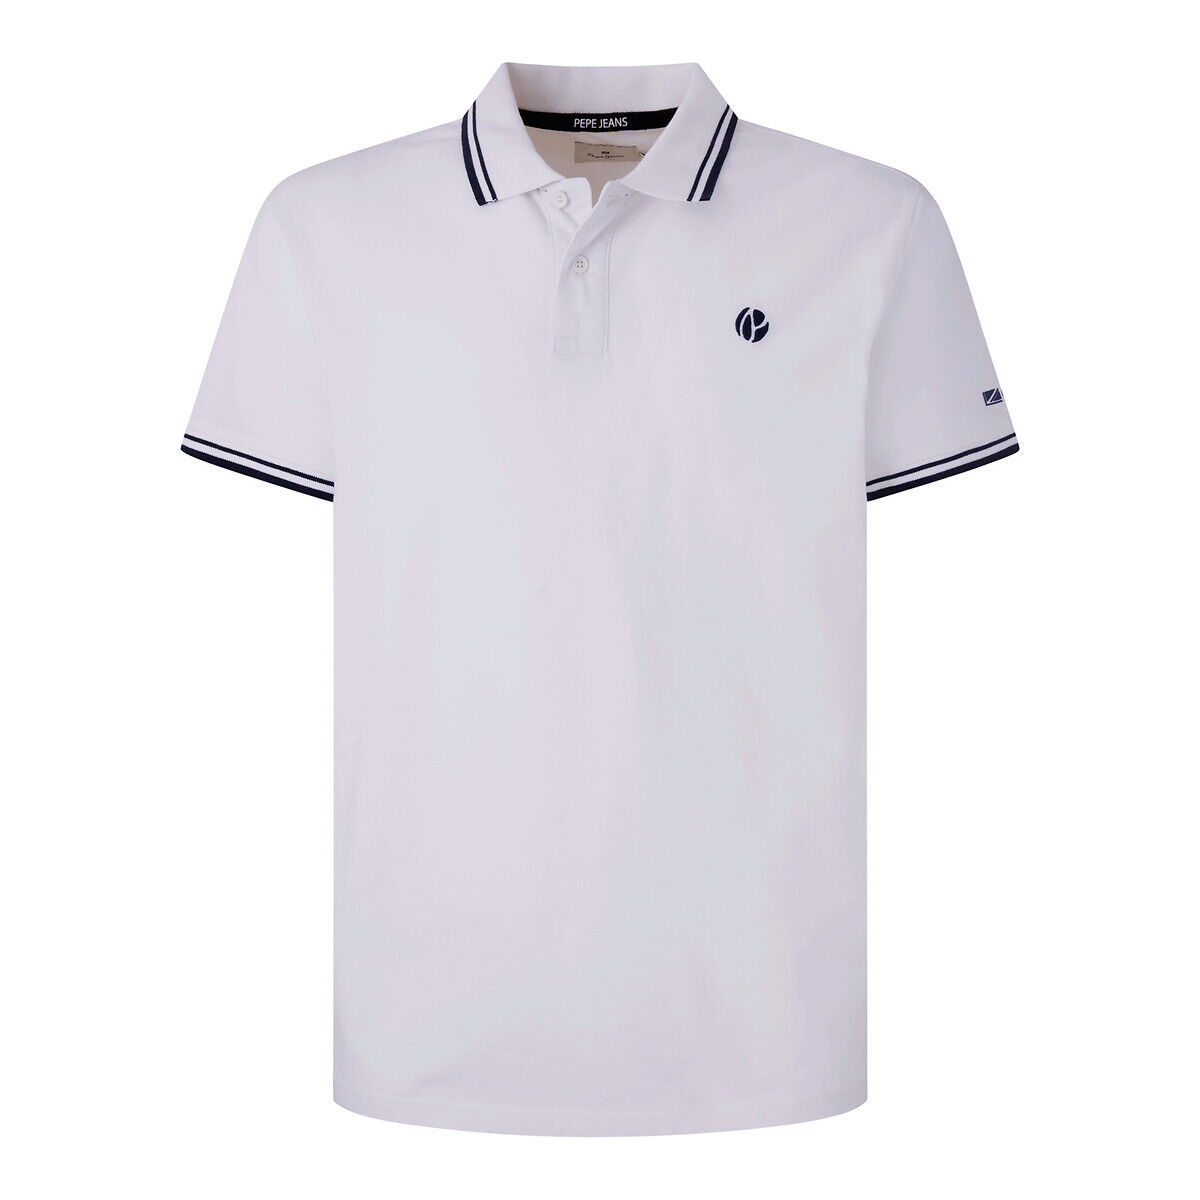 PEPE JEANS Polo droit maille piquée Frederick